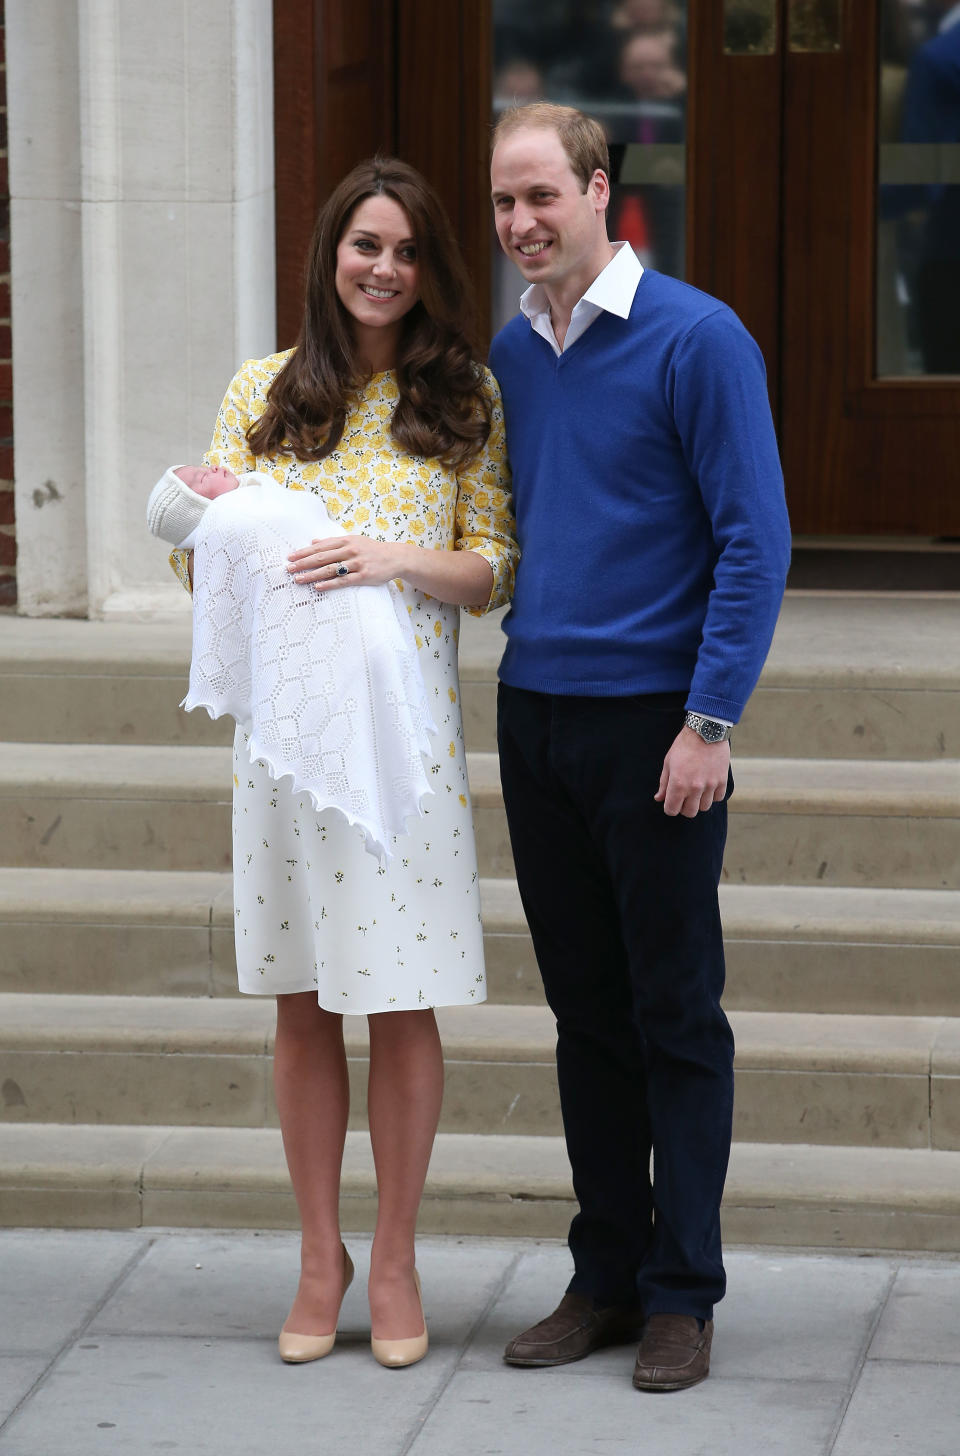 The Duke and Duchess of Cambridge debuted their second child, Princess Charlotte, to the world on May 2, 2015. Their daughter was delivered at 8:34am and weighed 8lbs 3 oz. For the big reveal, Kate chose a Jenny Packham dress in spring-ready yellow. [Photo: Getty]